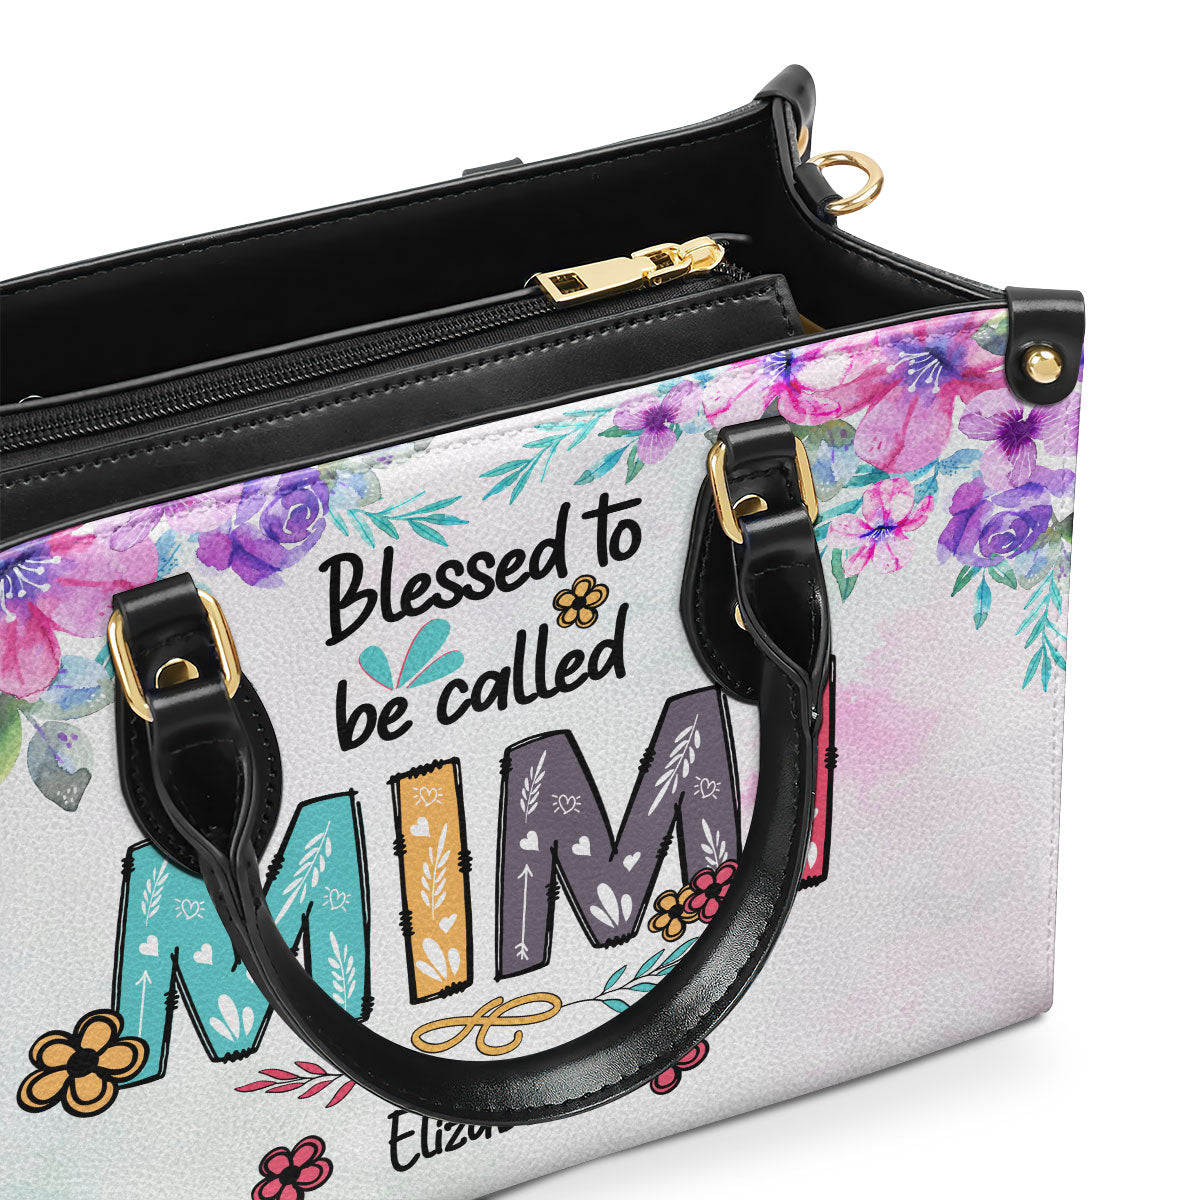 Blessed To Be Called Nana - Personalized Leather Handbag MS99